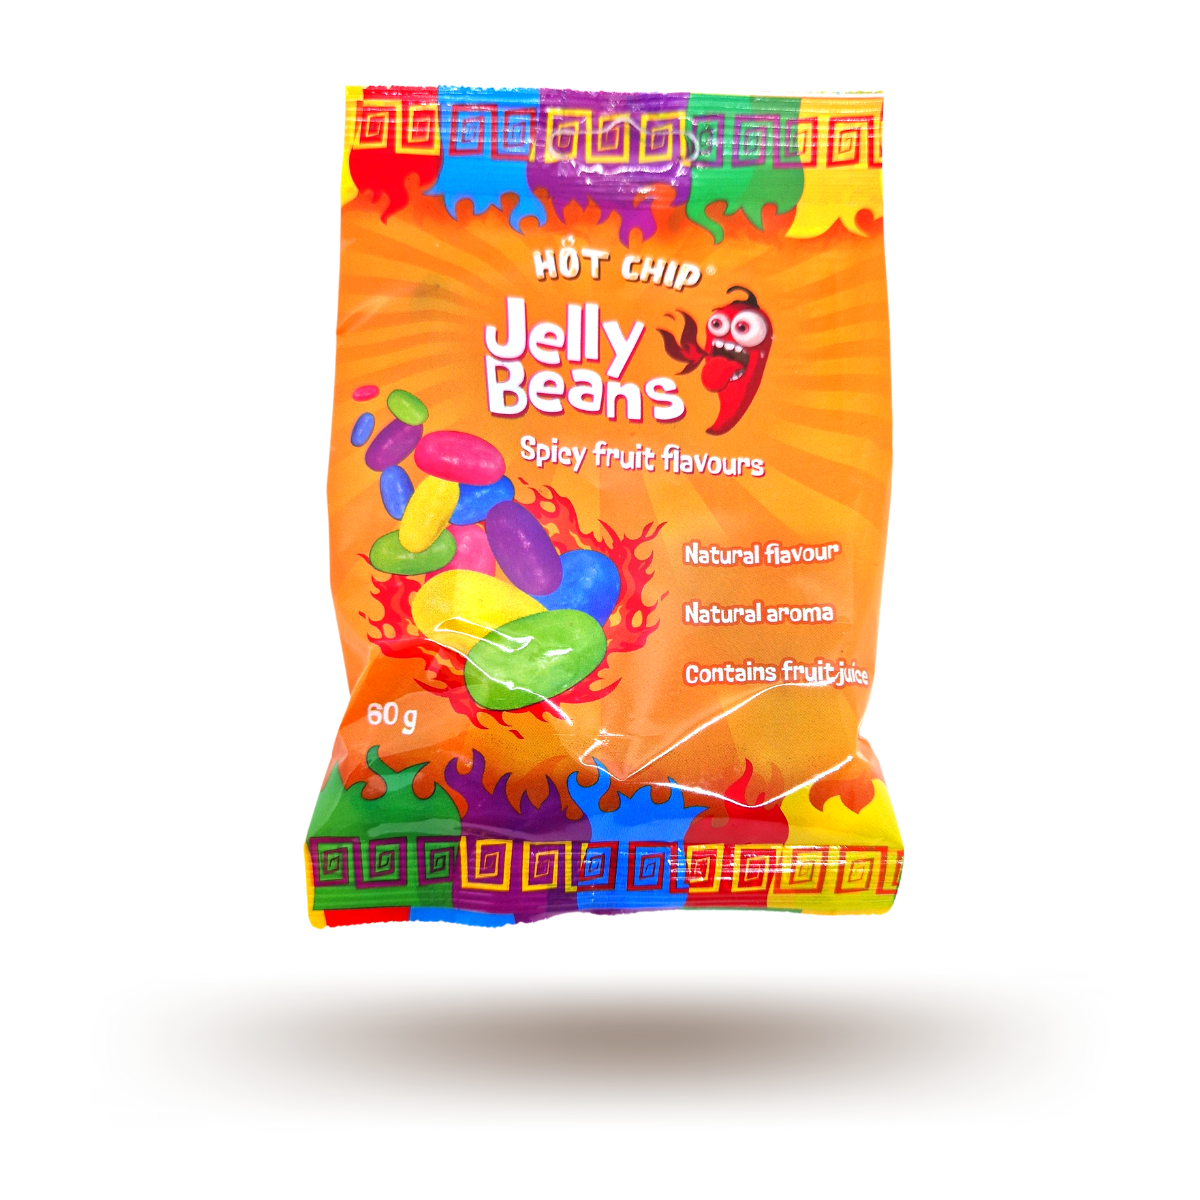 Hot jelly beans